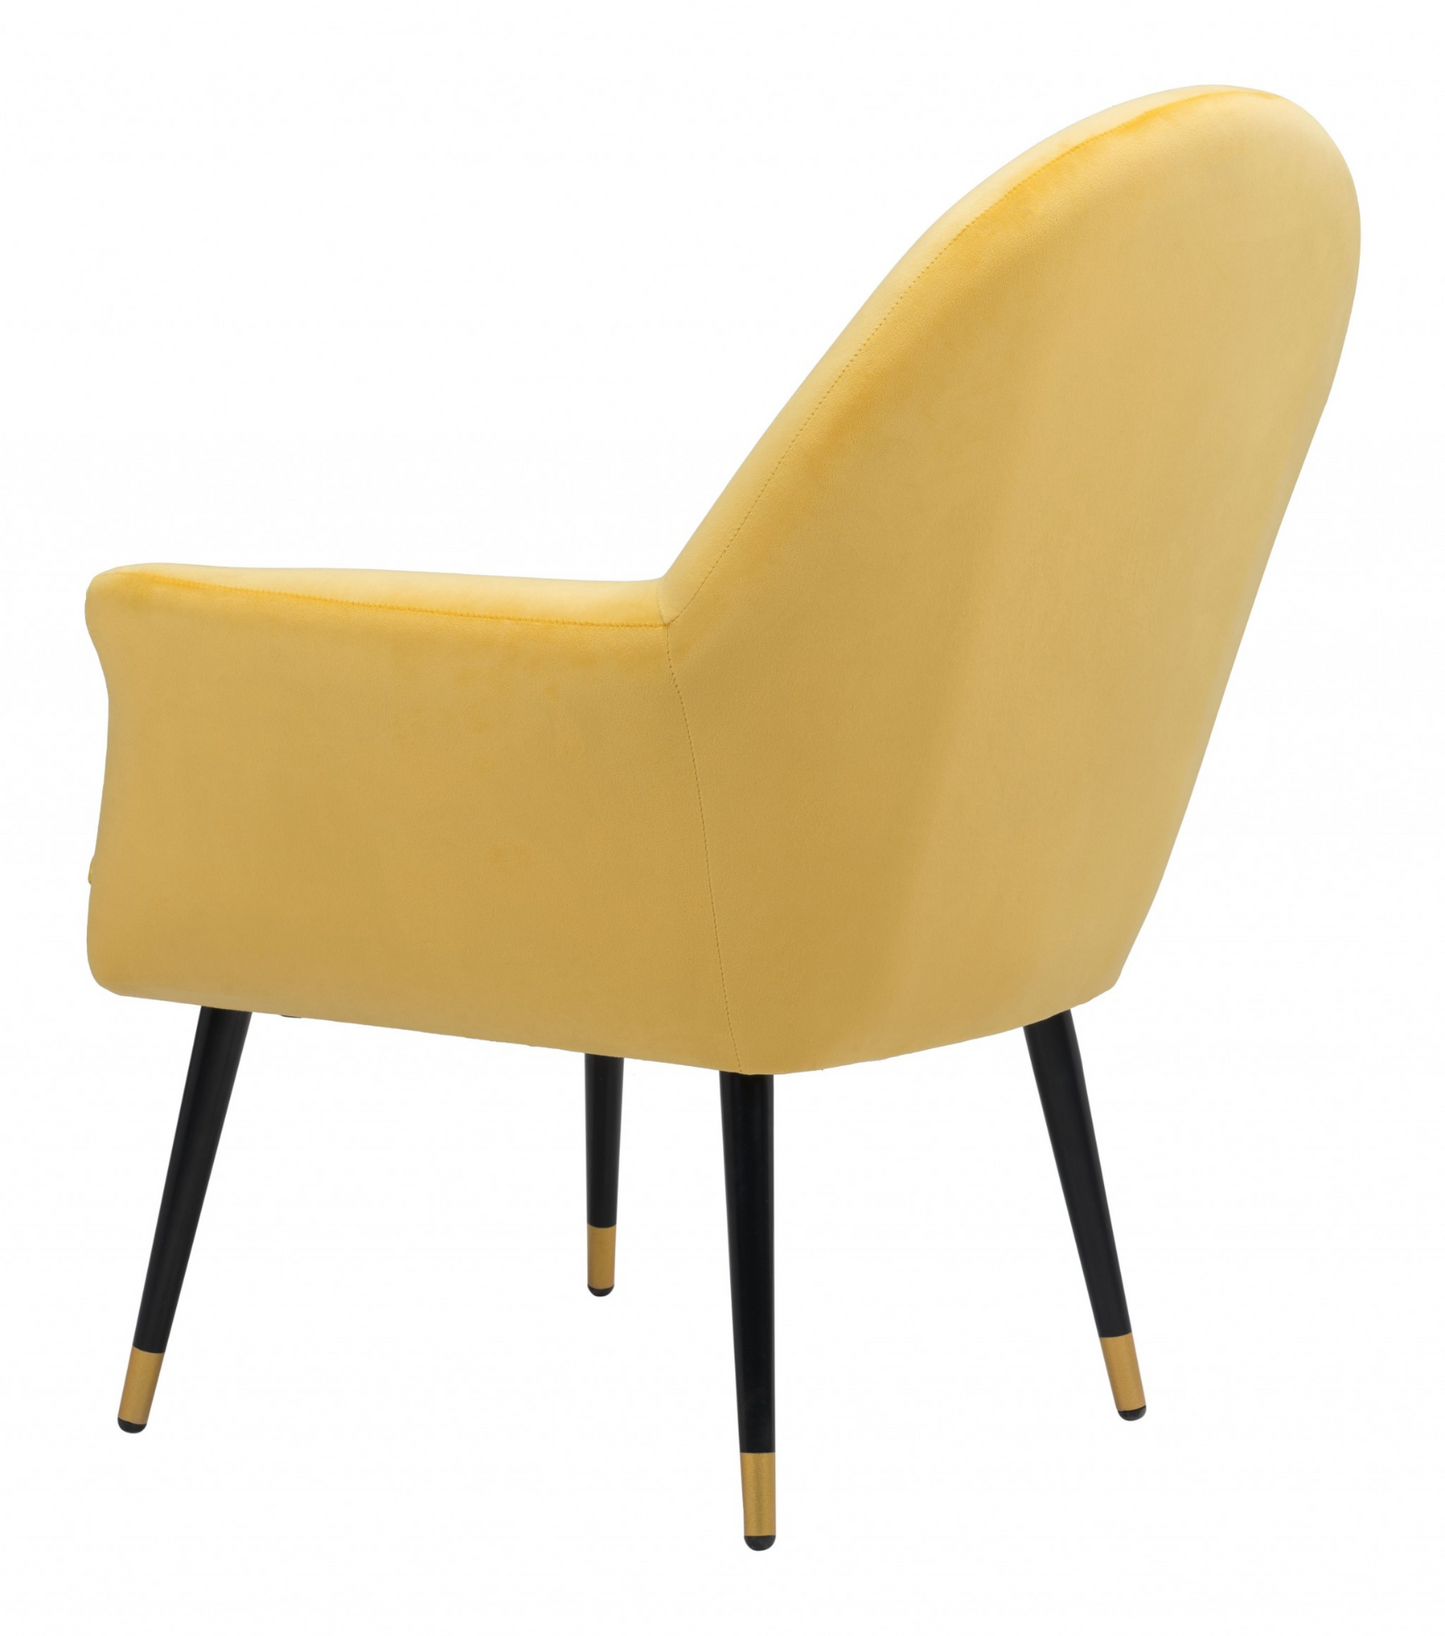 "30"" Yellow And Gold Velvet Arm Chair"